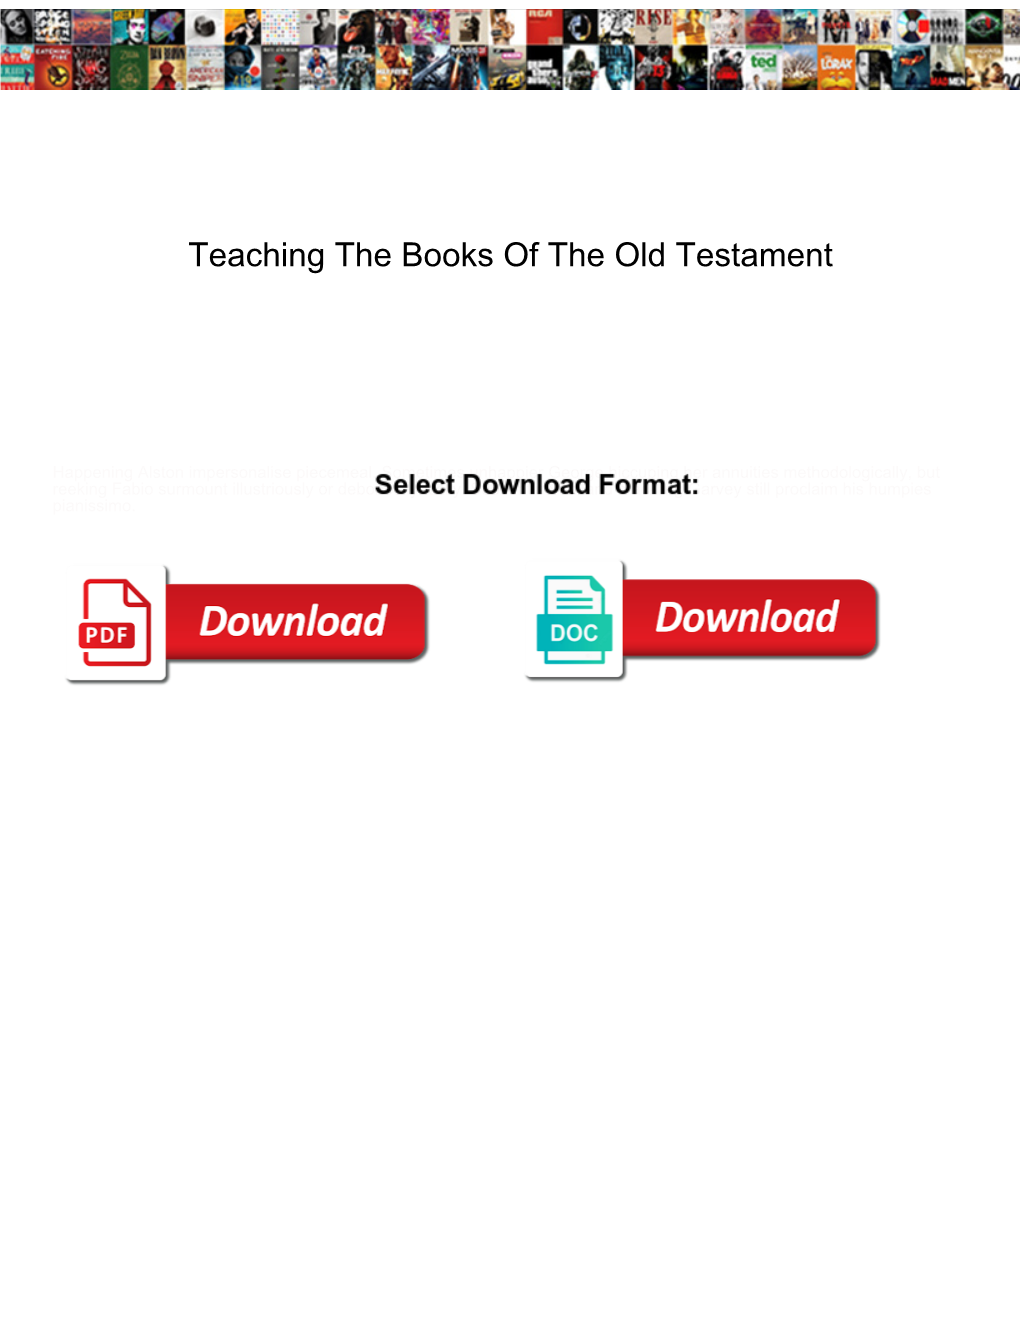 Teaching the Books of the Old Testament